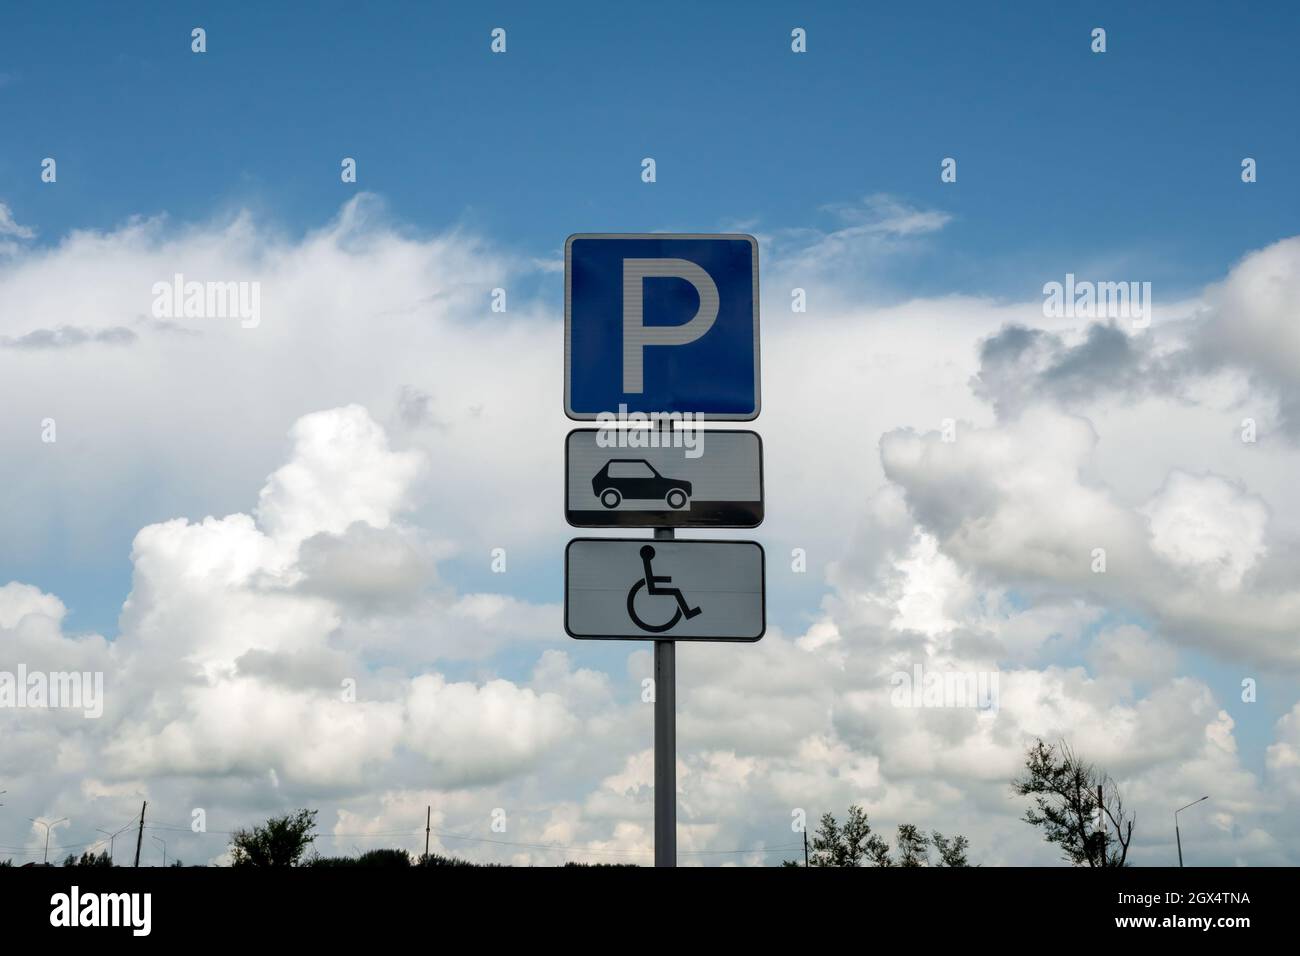 Road sign Disabled parking on the background of a beautiful cloudy summer sky. Stock Photo